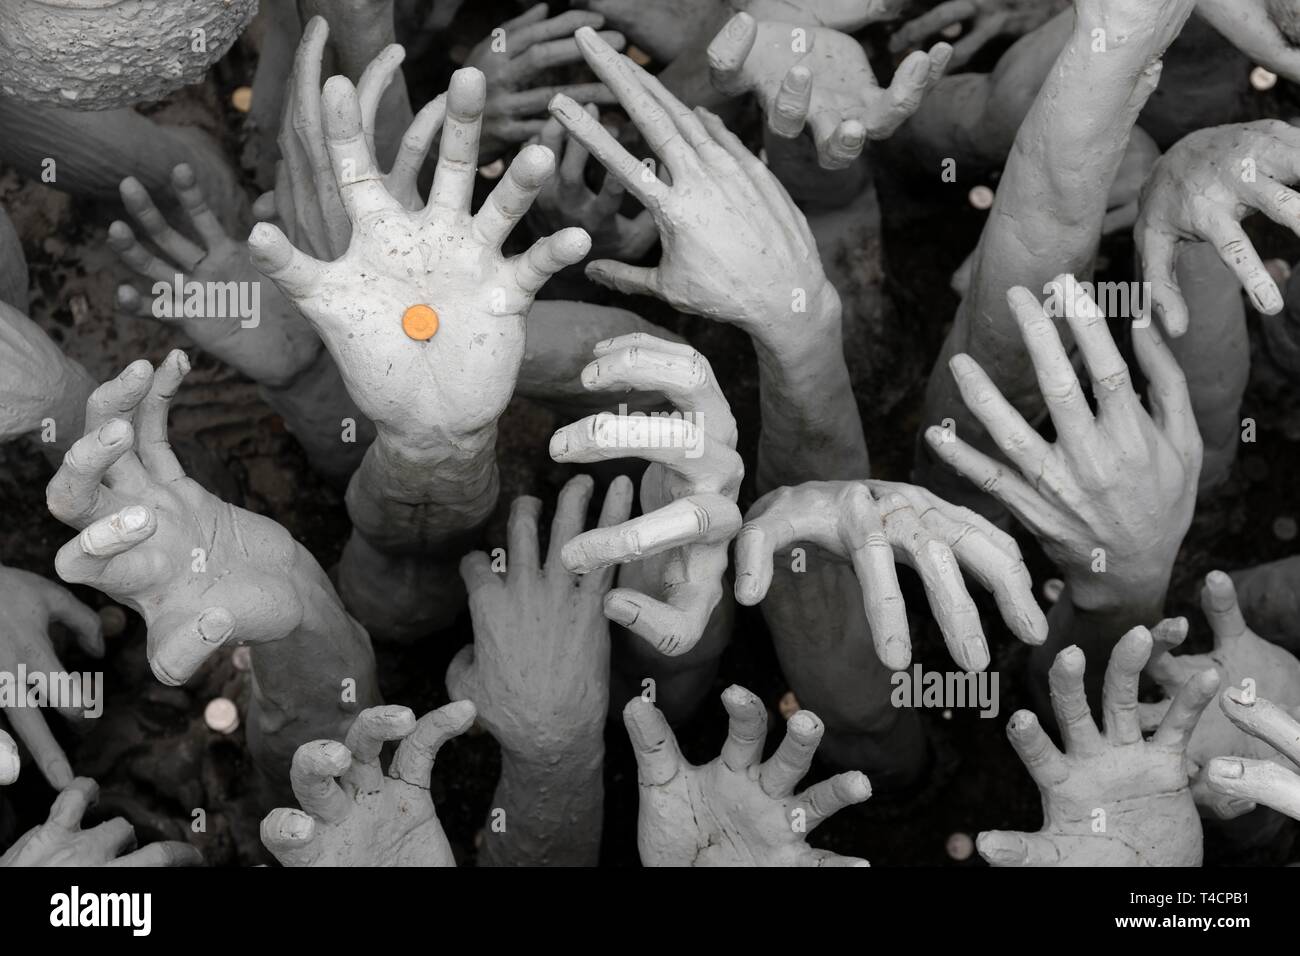 Hands pleading for help, representation of hell, bridge to the entrance of white temples, Wat Rong Khun, Chiang Rai, Northern Thailand, Thailand Stock Photo